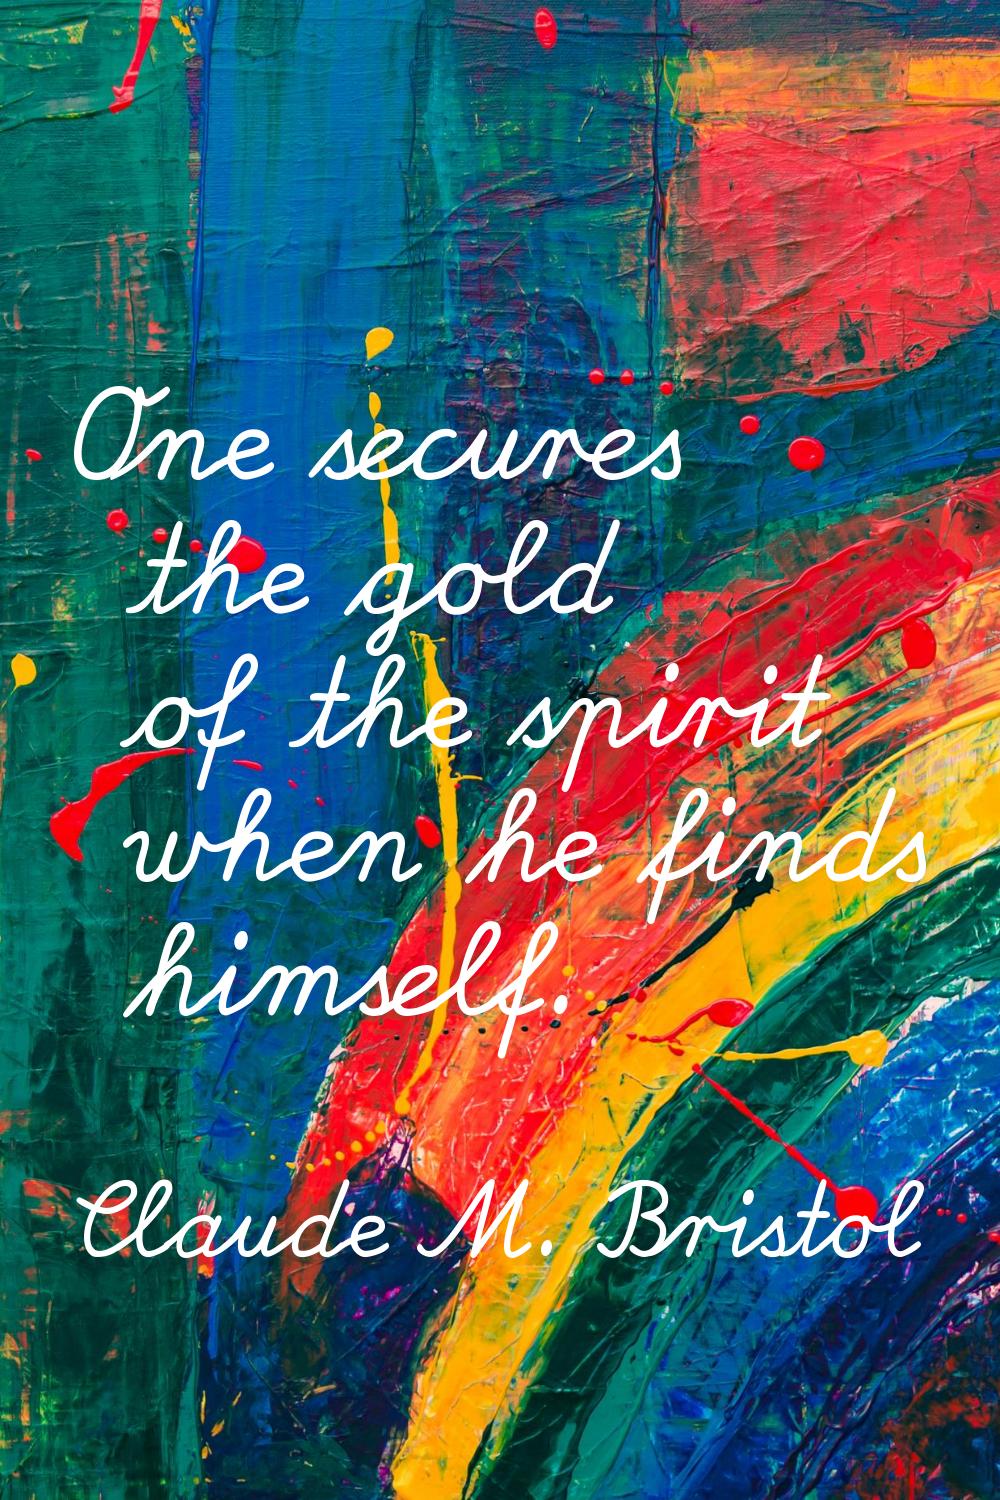 One secures the gold of the spirit when he finds himself.